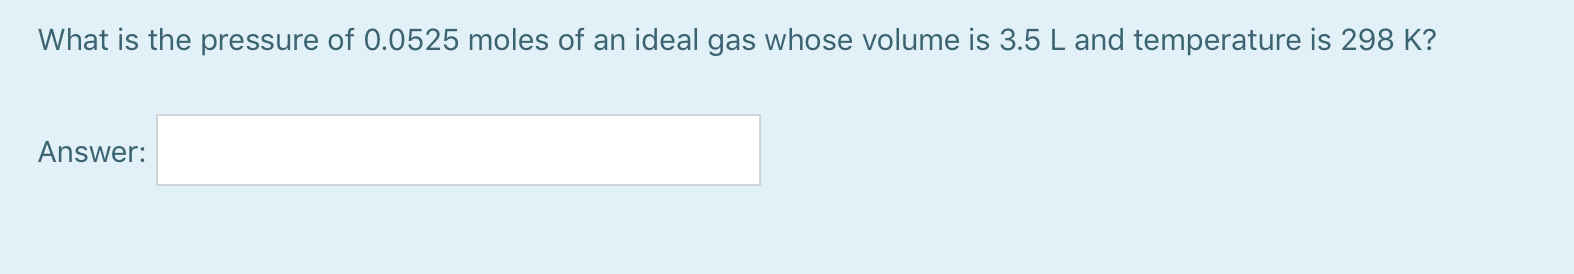 What is the pressure of 0.0525 moles of an ideal gas whose volume is 3.5 L and temperature is 298 K?
Answer:
